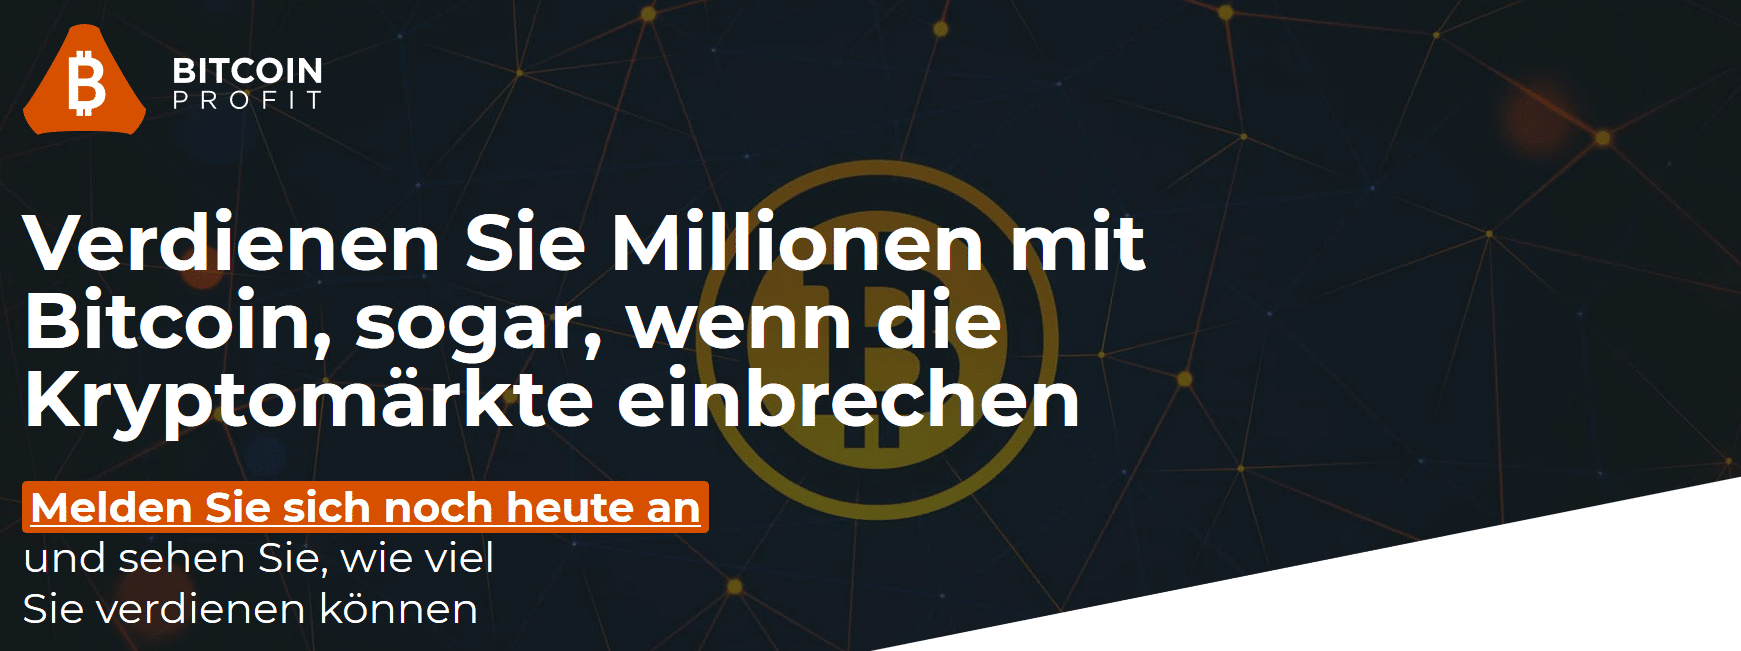 Party mit Bitcoins und co – sdfparty.org